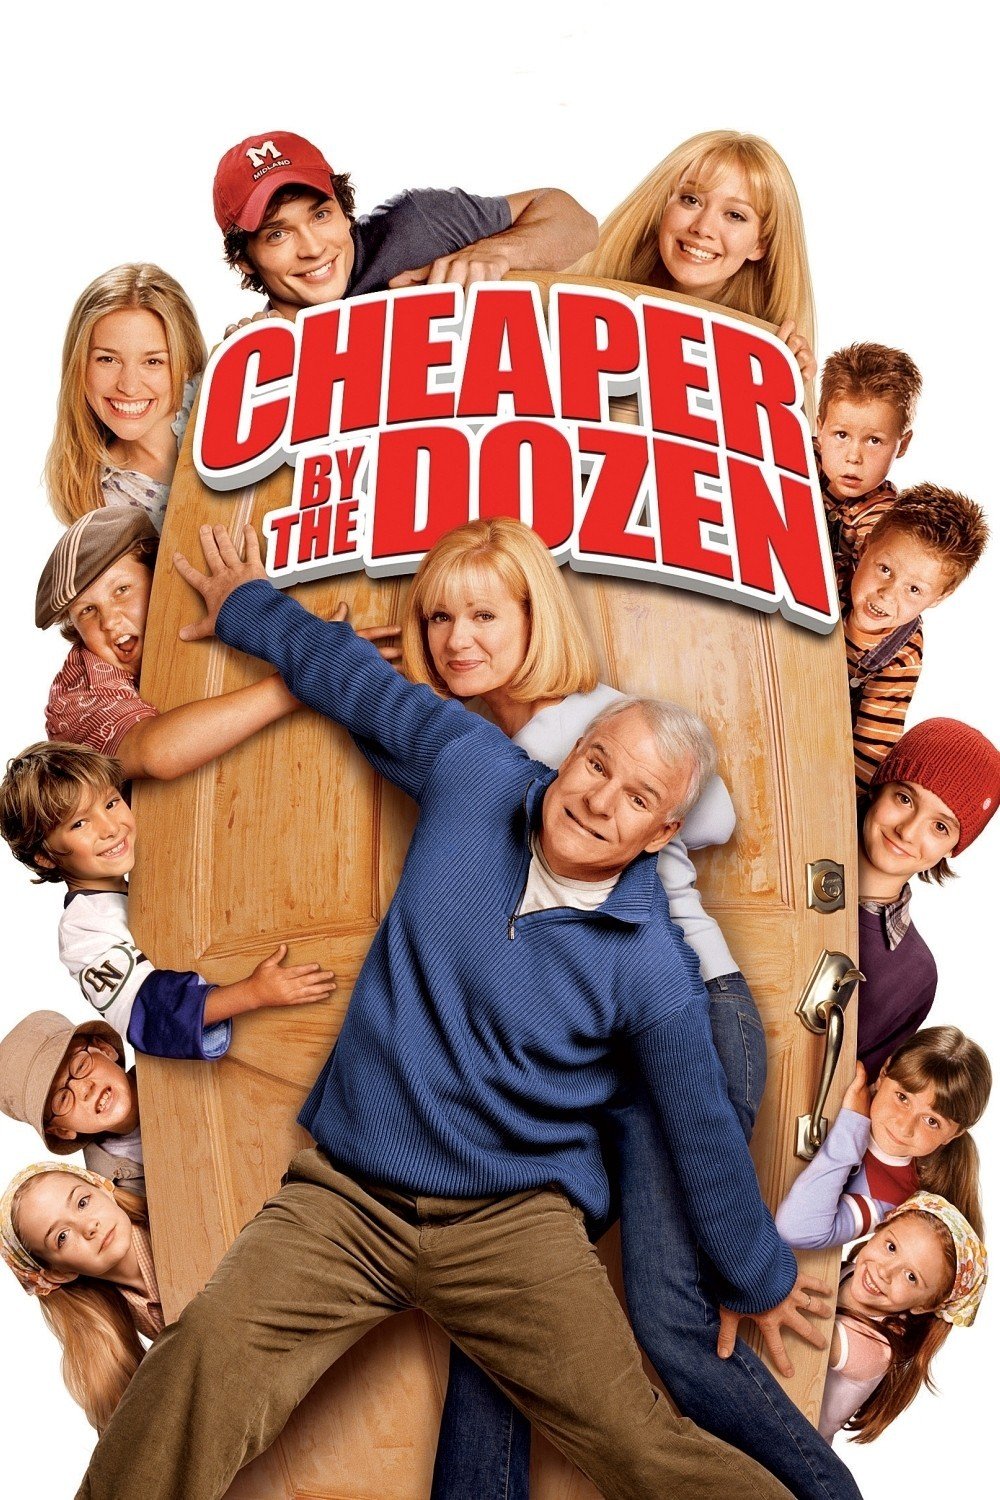 Poster of the movie Cheaper by the Dozen